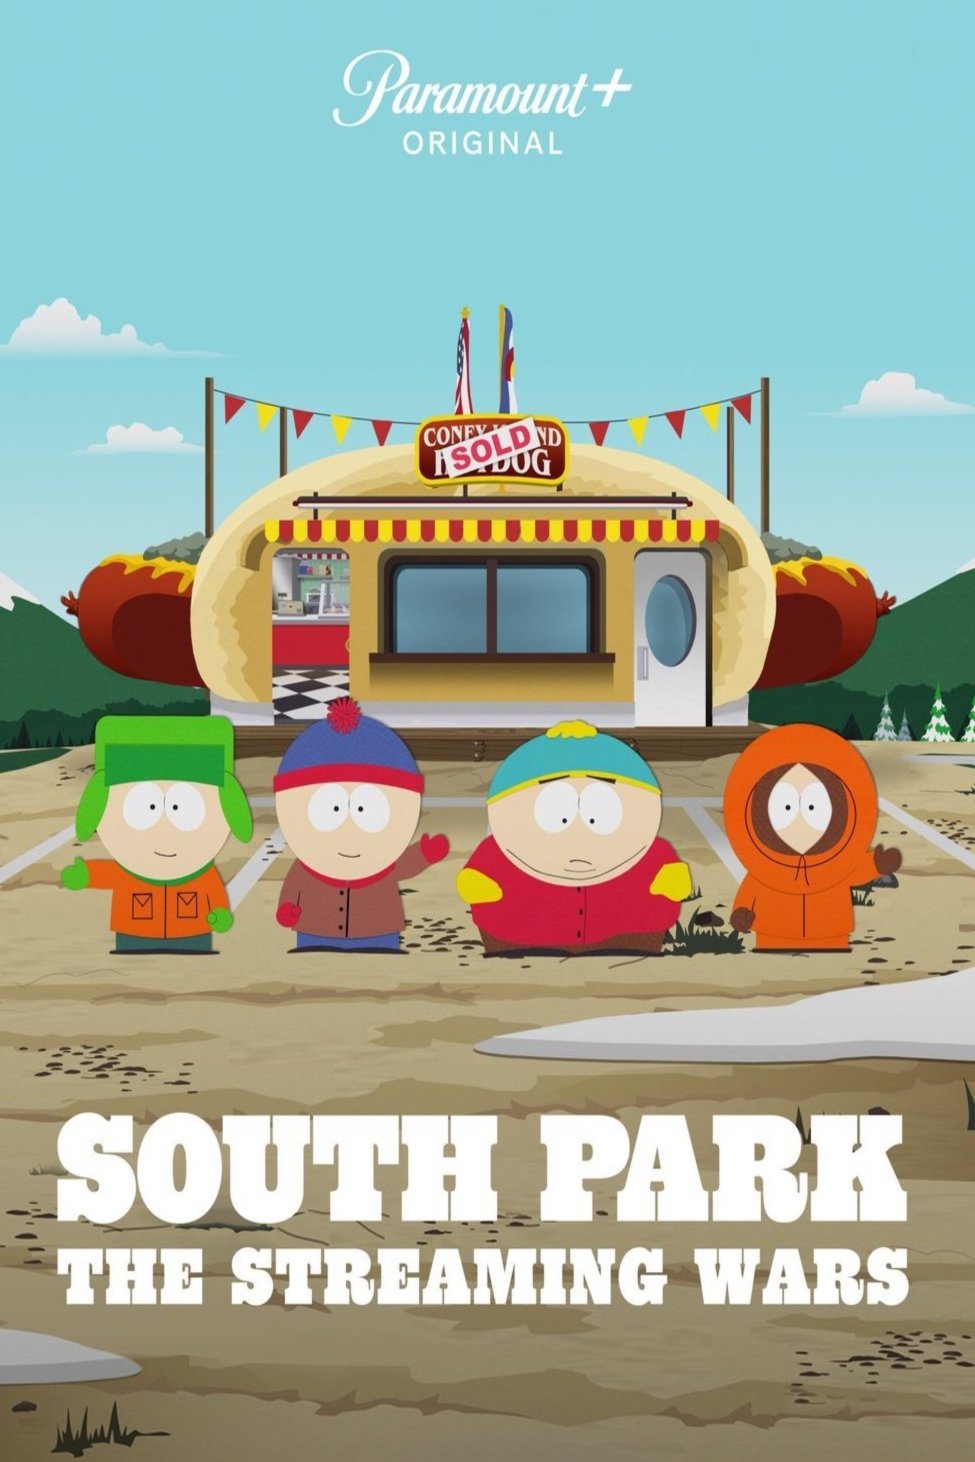 Poster of the movie South Park: The Streaming Wars